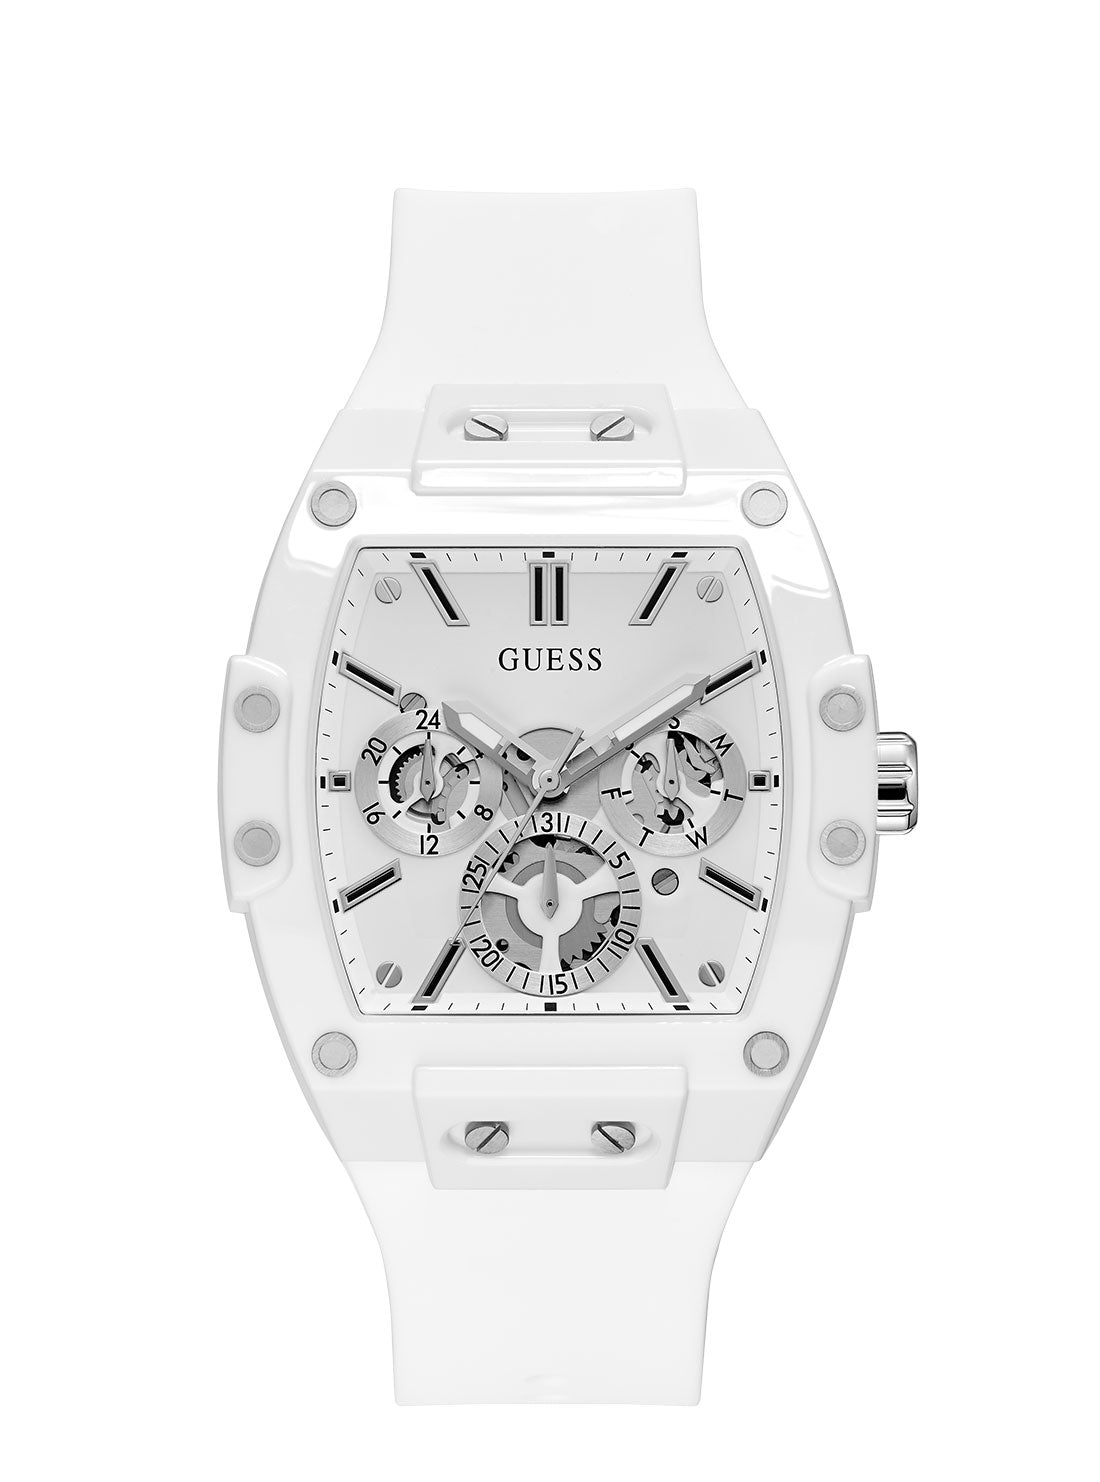 Phoenix GUESS Watch Silicone White -